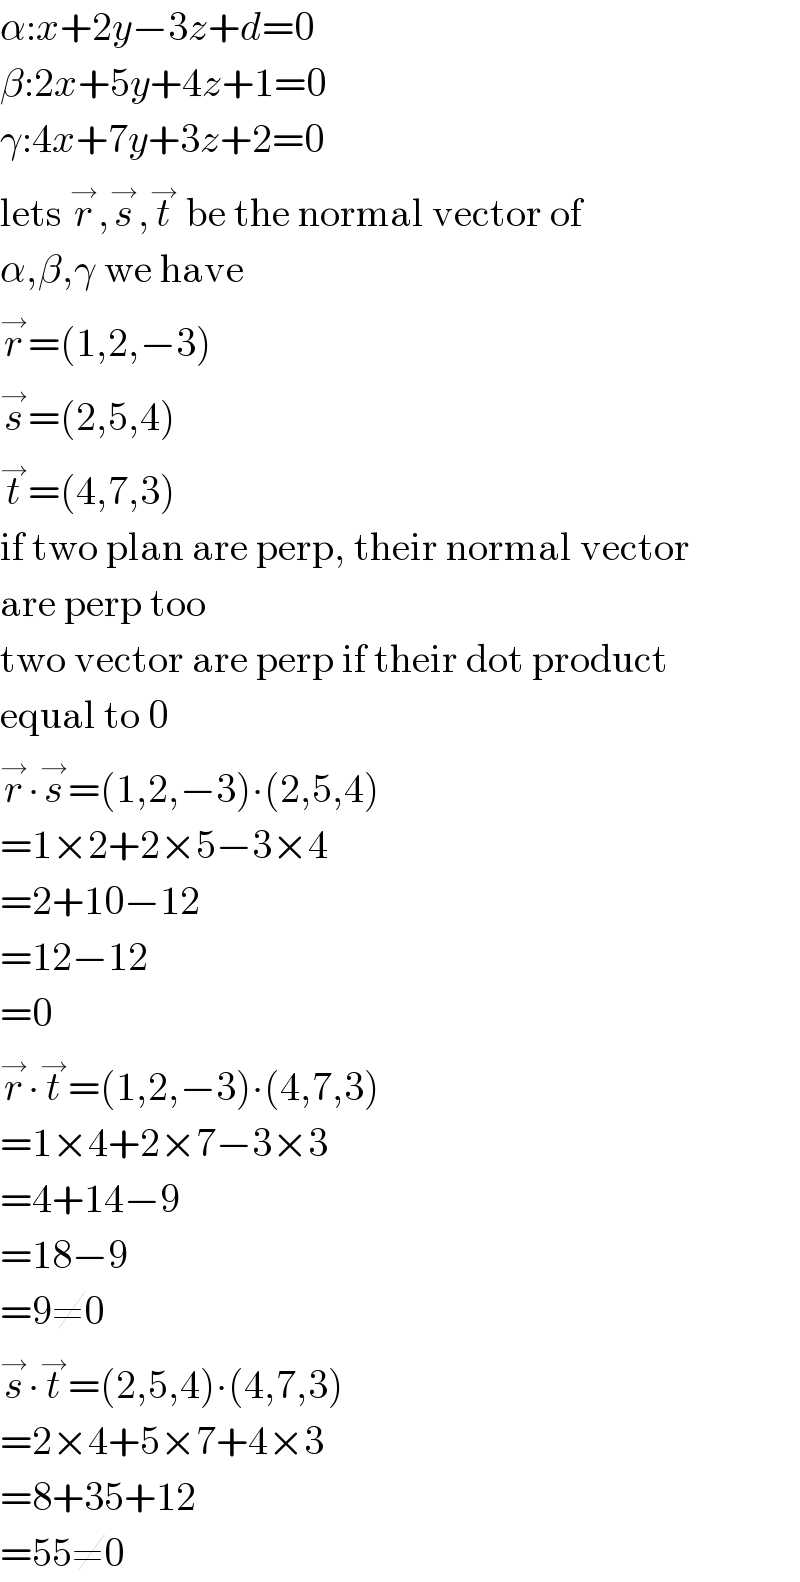 α:x+2y−3z+d=0  β:2x+5y+4z+1=0  γ:4x+7y+3z+2=0  lets r^→ ,s^→ ,t^→  be the normal vector of   α,β,γ we have  r^→ =(1,2,−3)  s^→ =(2,5,4)  t^→ =(4,7,3)  if two plan are perp, their normal vector  are perp too  two vector are perp if their dot product  equal to 0  r^→ ∙s^→ =(1,2,−3)∙(2,5,4)  =1×2+2×5−3×4  =2+10−12  =12−12  =0  r^→ ∙t^→ =(1,2,−3)∙(4,7,3)  =1×4+2×7−3×3  =4+14−9  =18−9  =9≠0  s^→ ∙t^→ =(2,5,4)∙(4,7,3)  =2×4+5×7+4×3  =8+35+12  =55≠0  